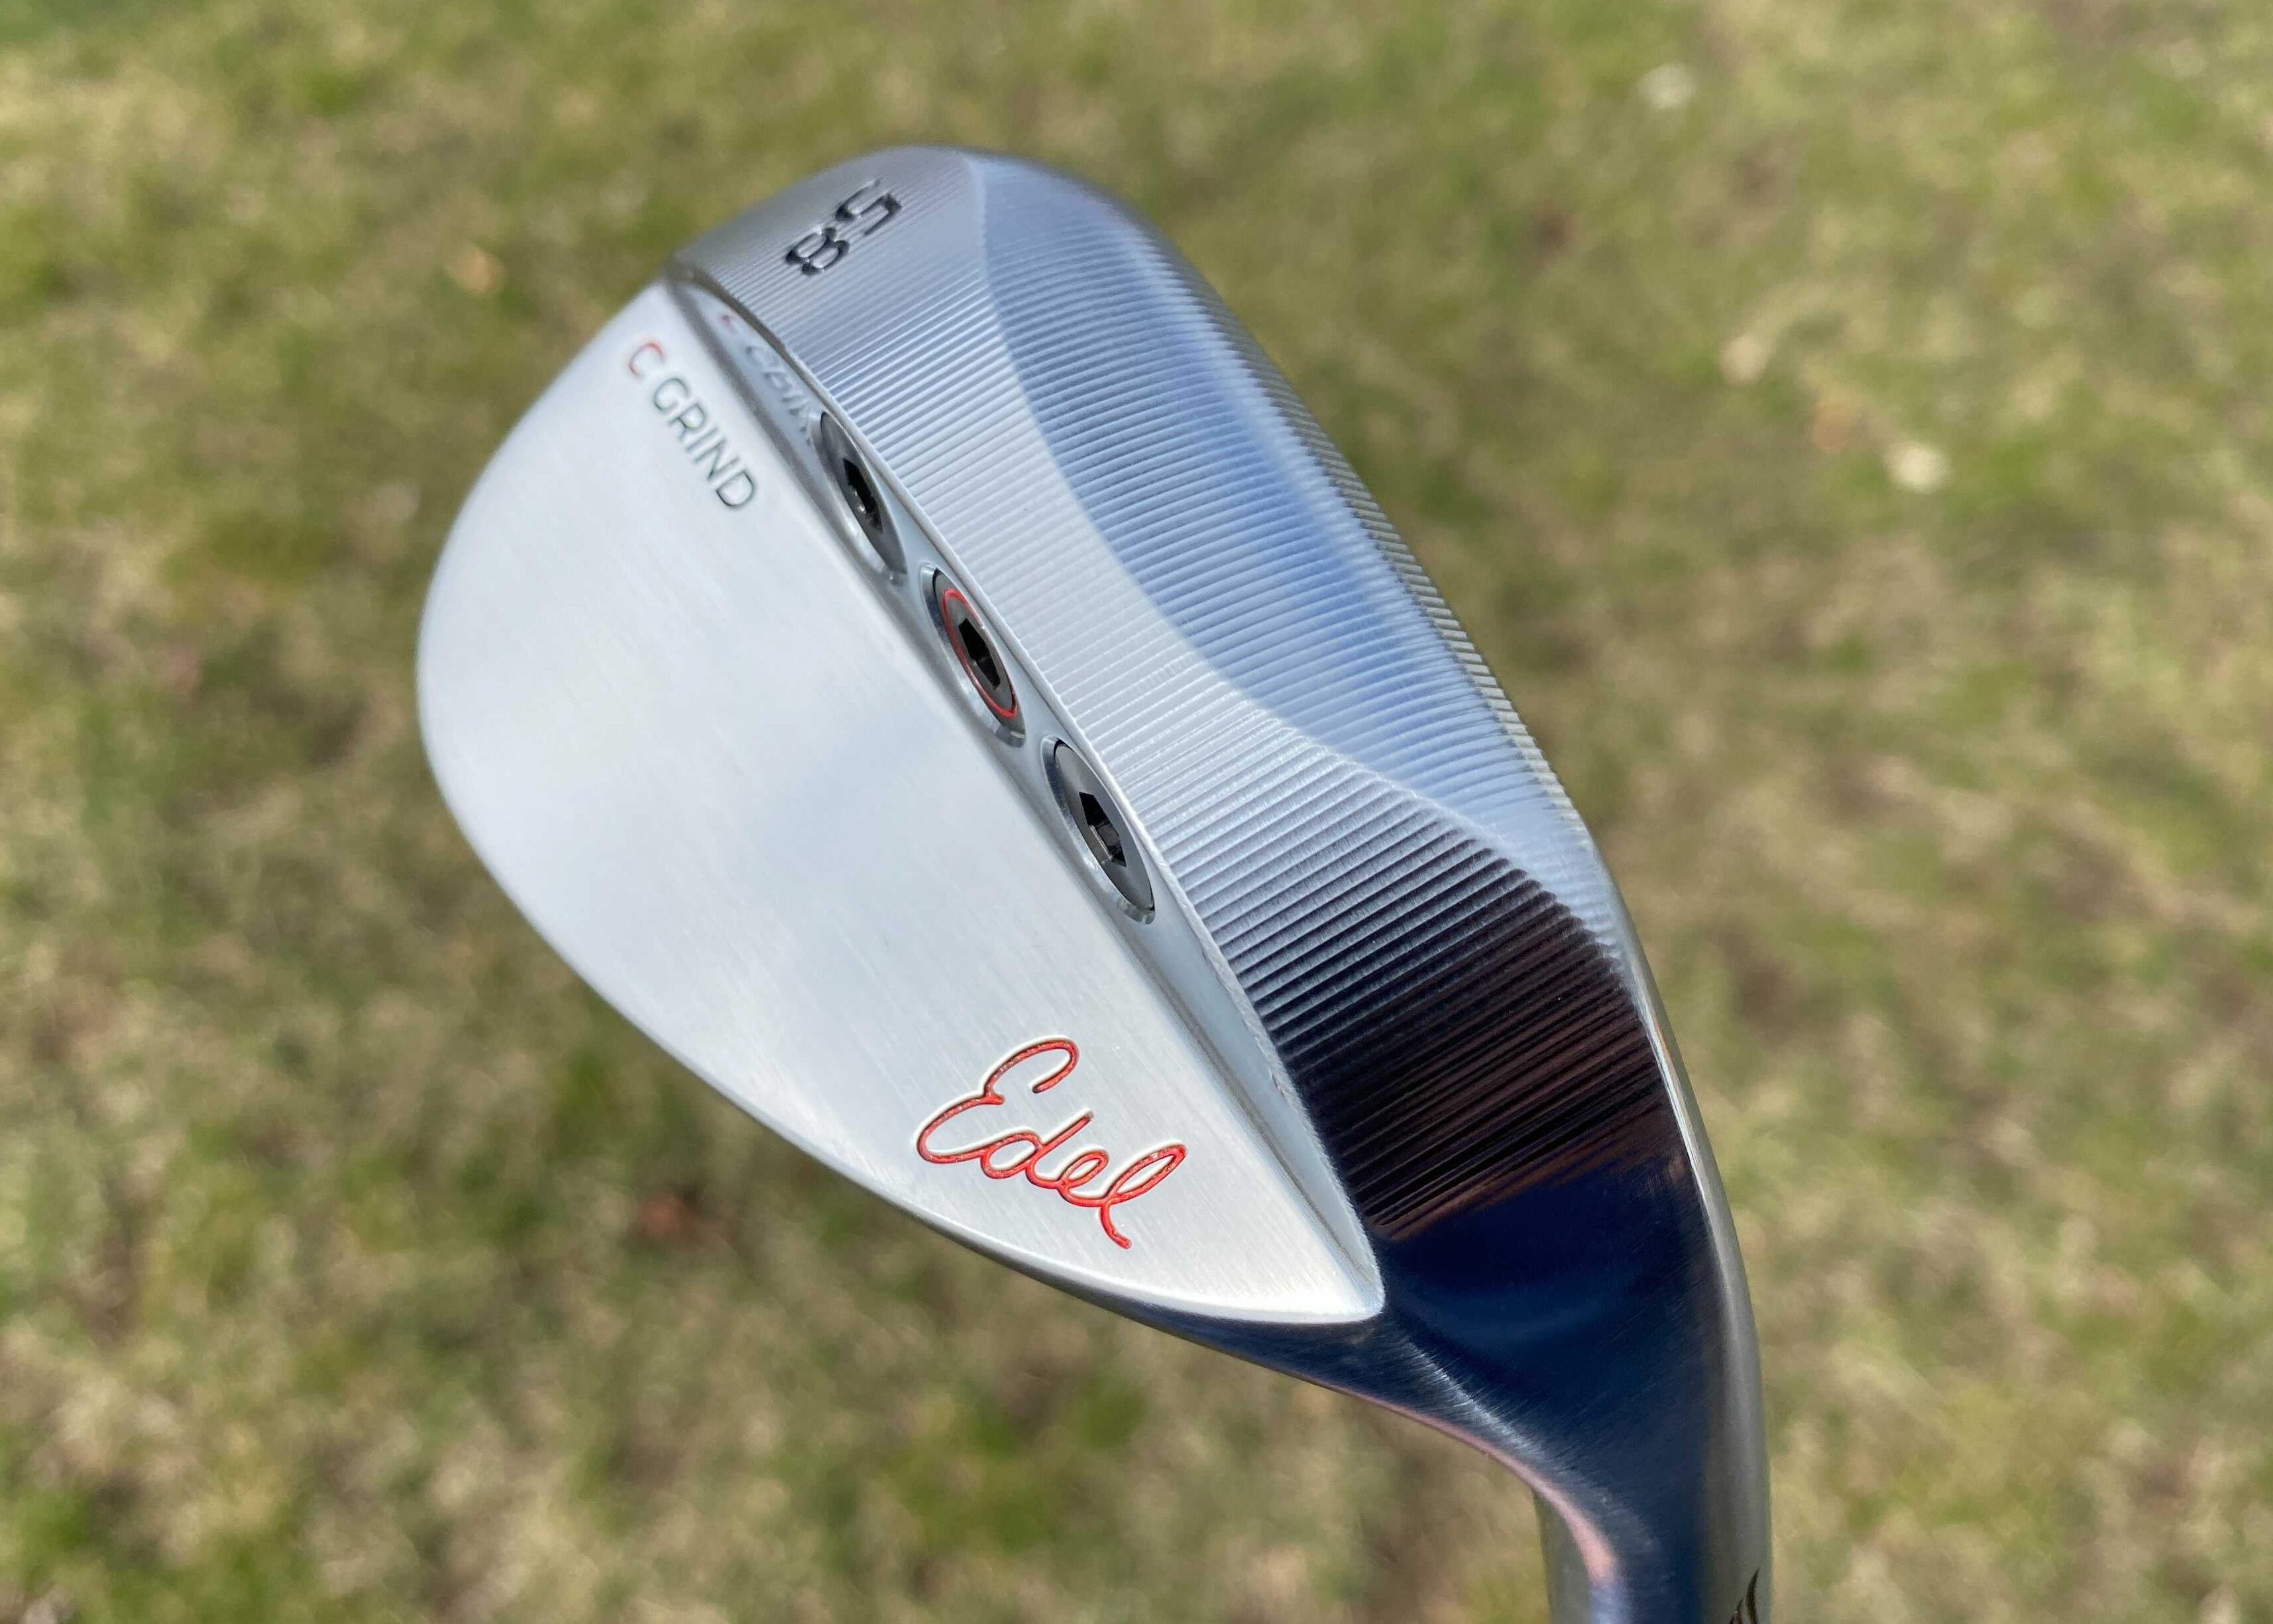 Edel introduces moveable weight Swing Match wedges for 2021 – GolfWRX